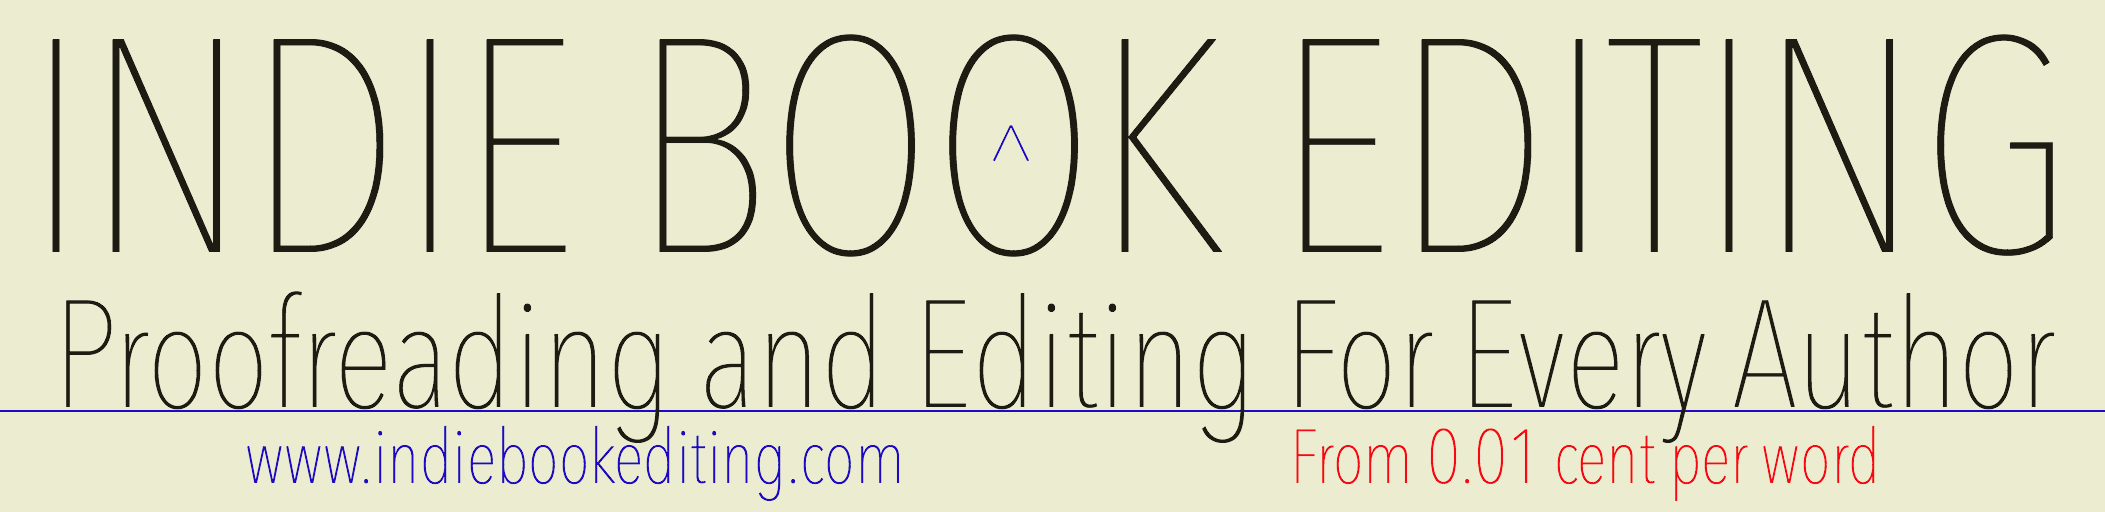 Have Your Book Edited by Experts from the Nation’s Top Publishing Houses